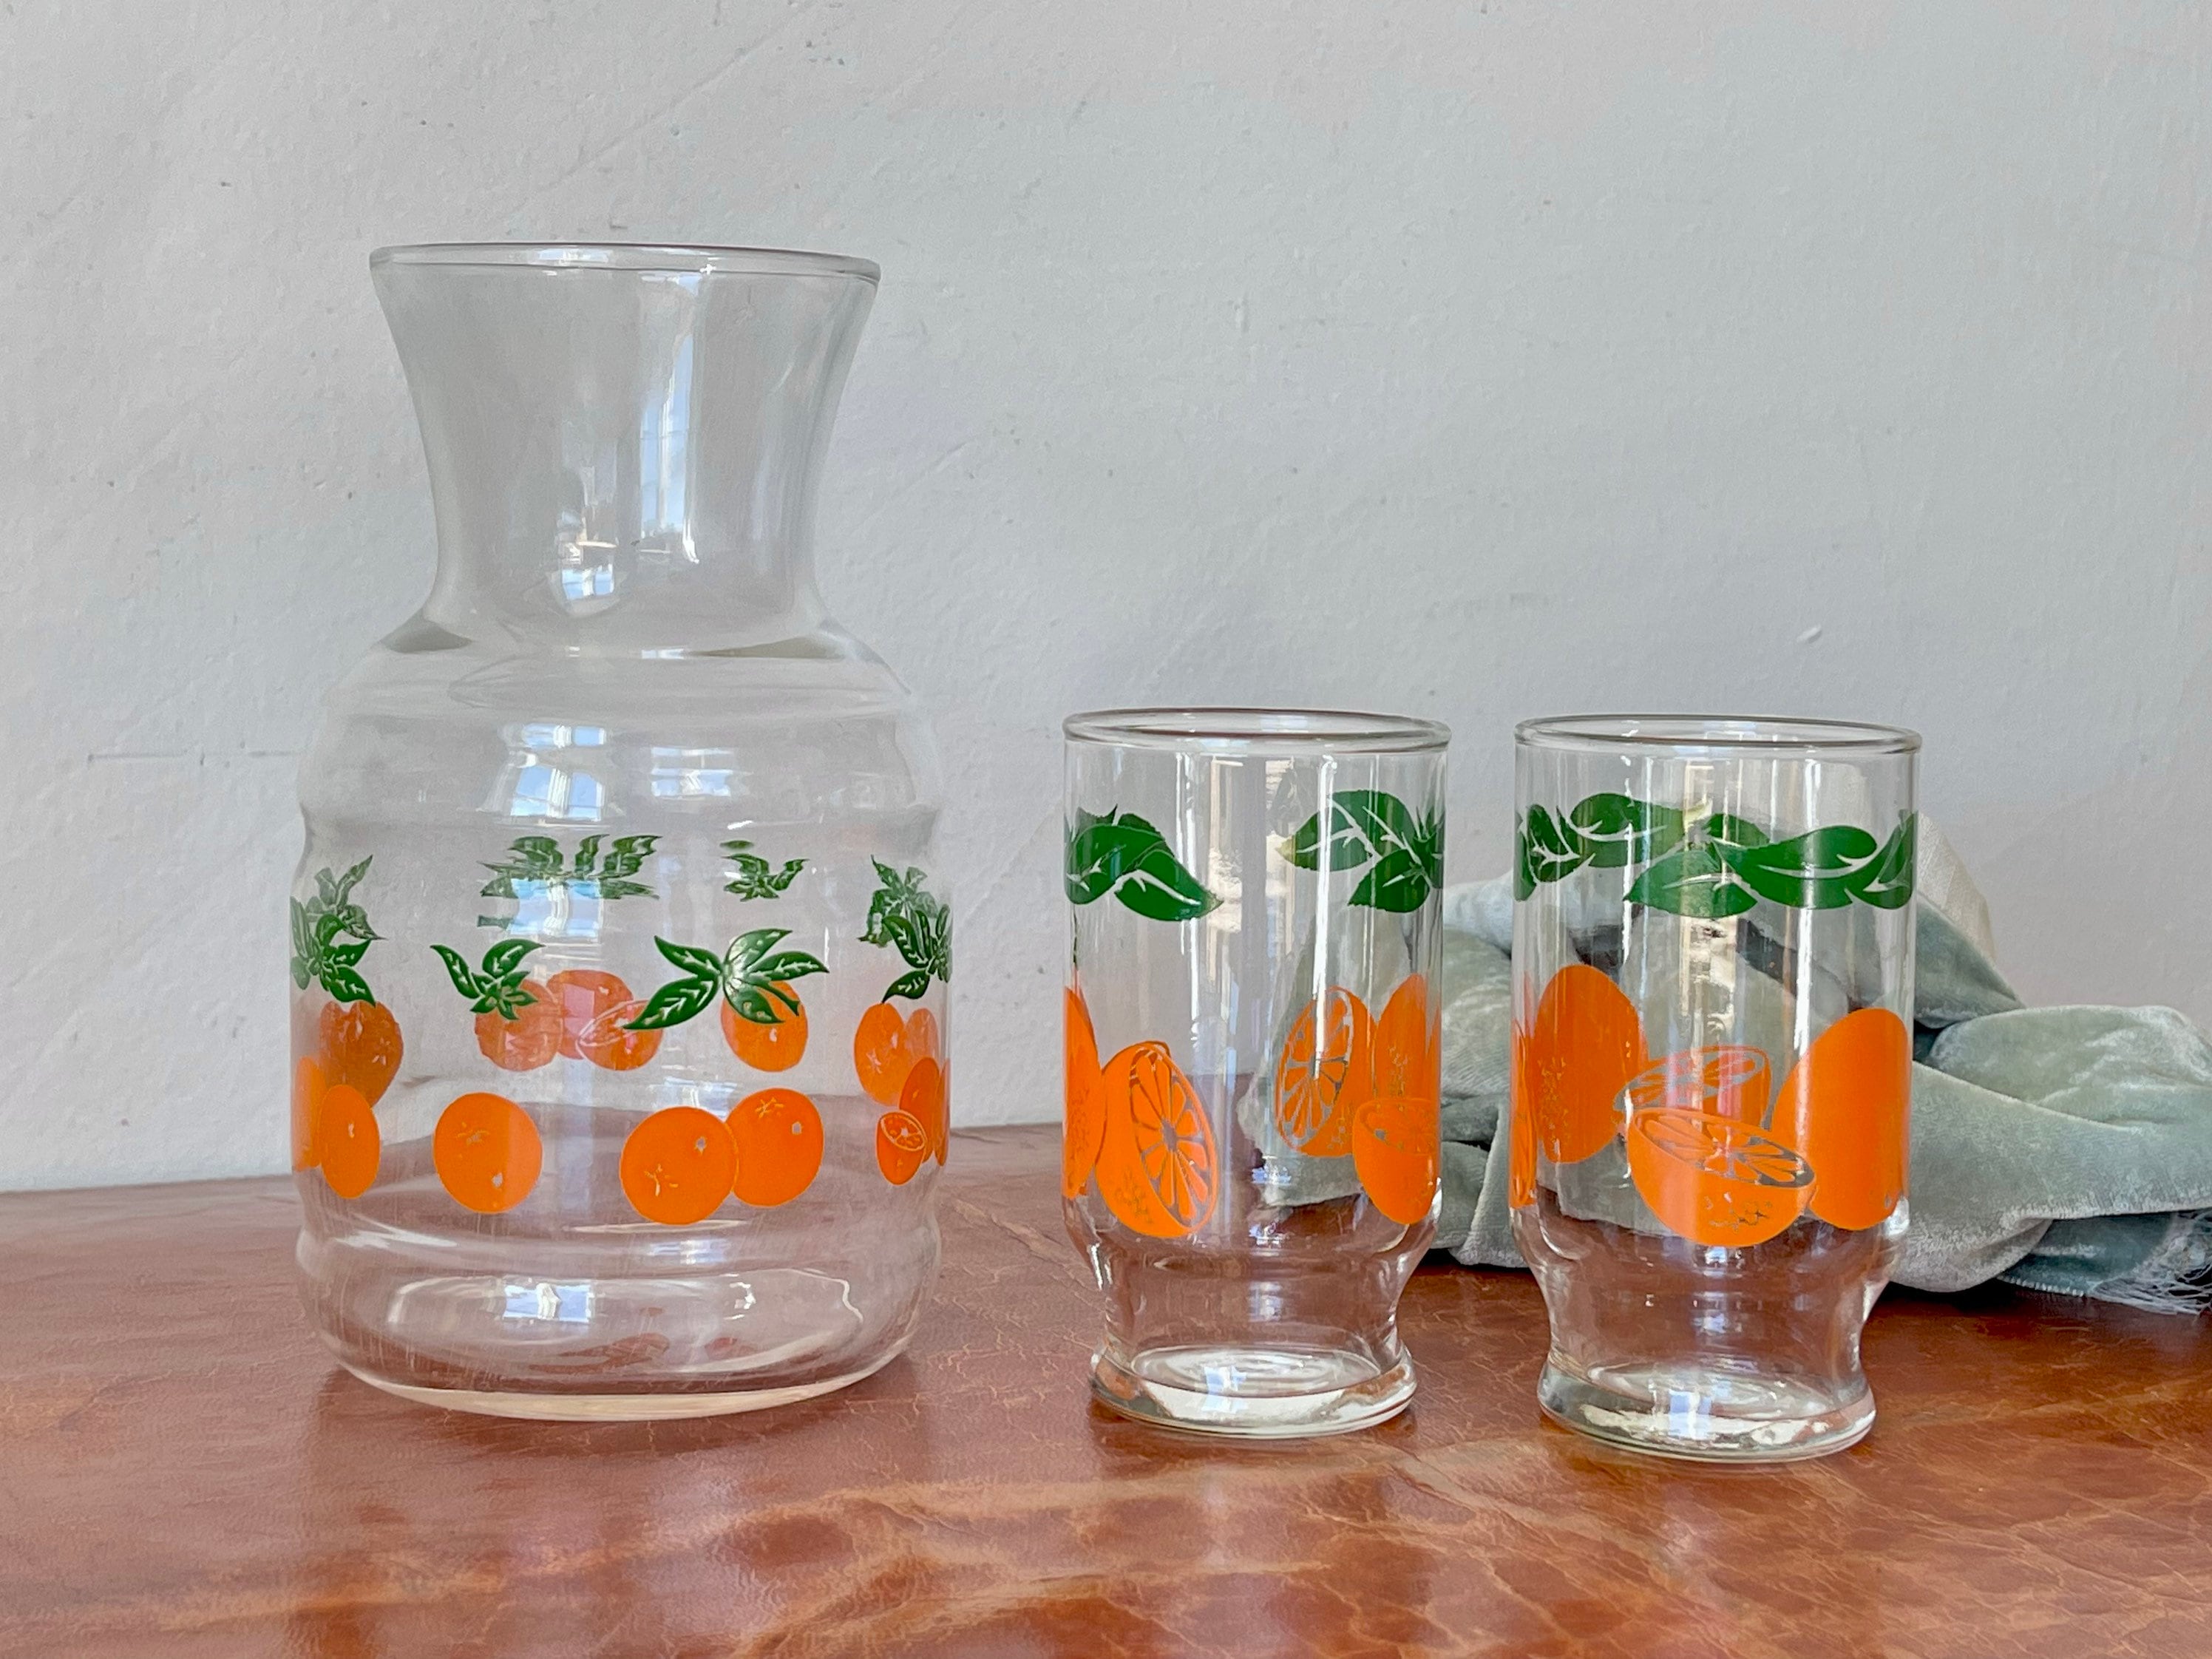 Vintage Pitcher 1960 's Orange Juice Carafe with Glasses Country Kitchen